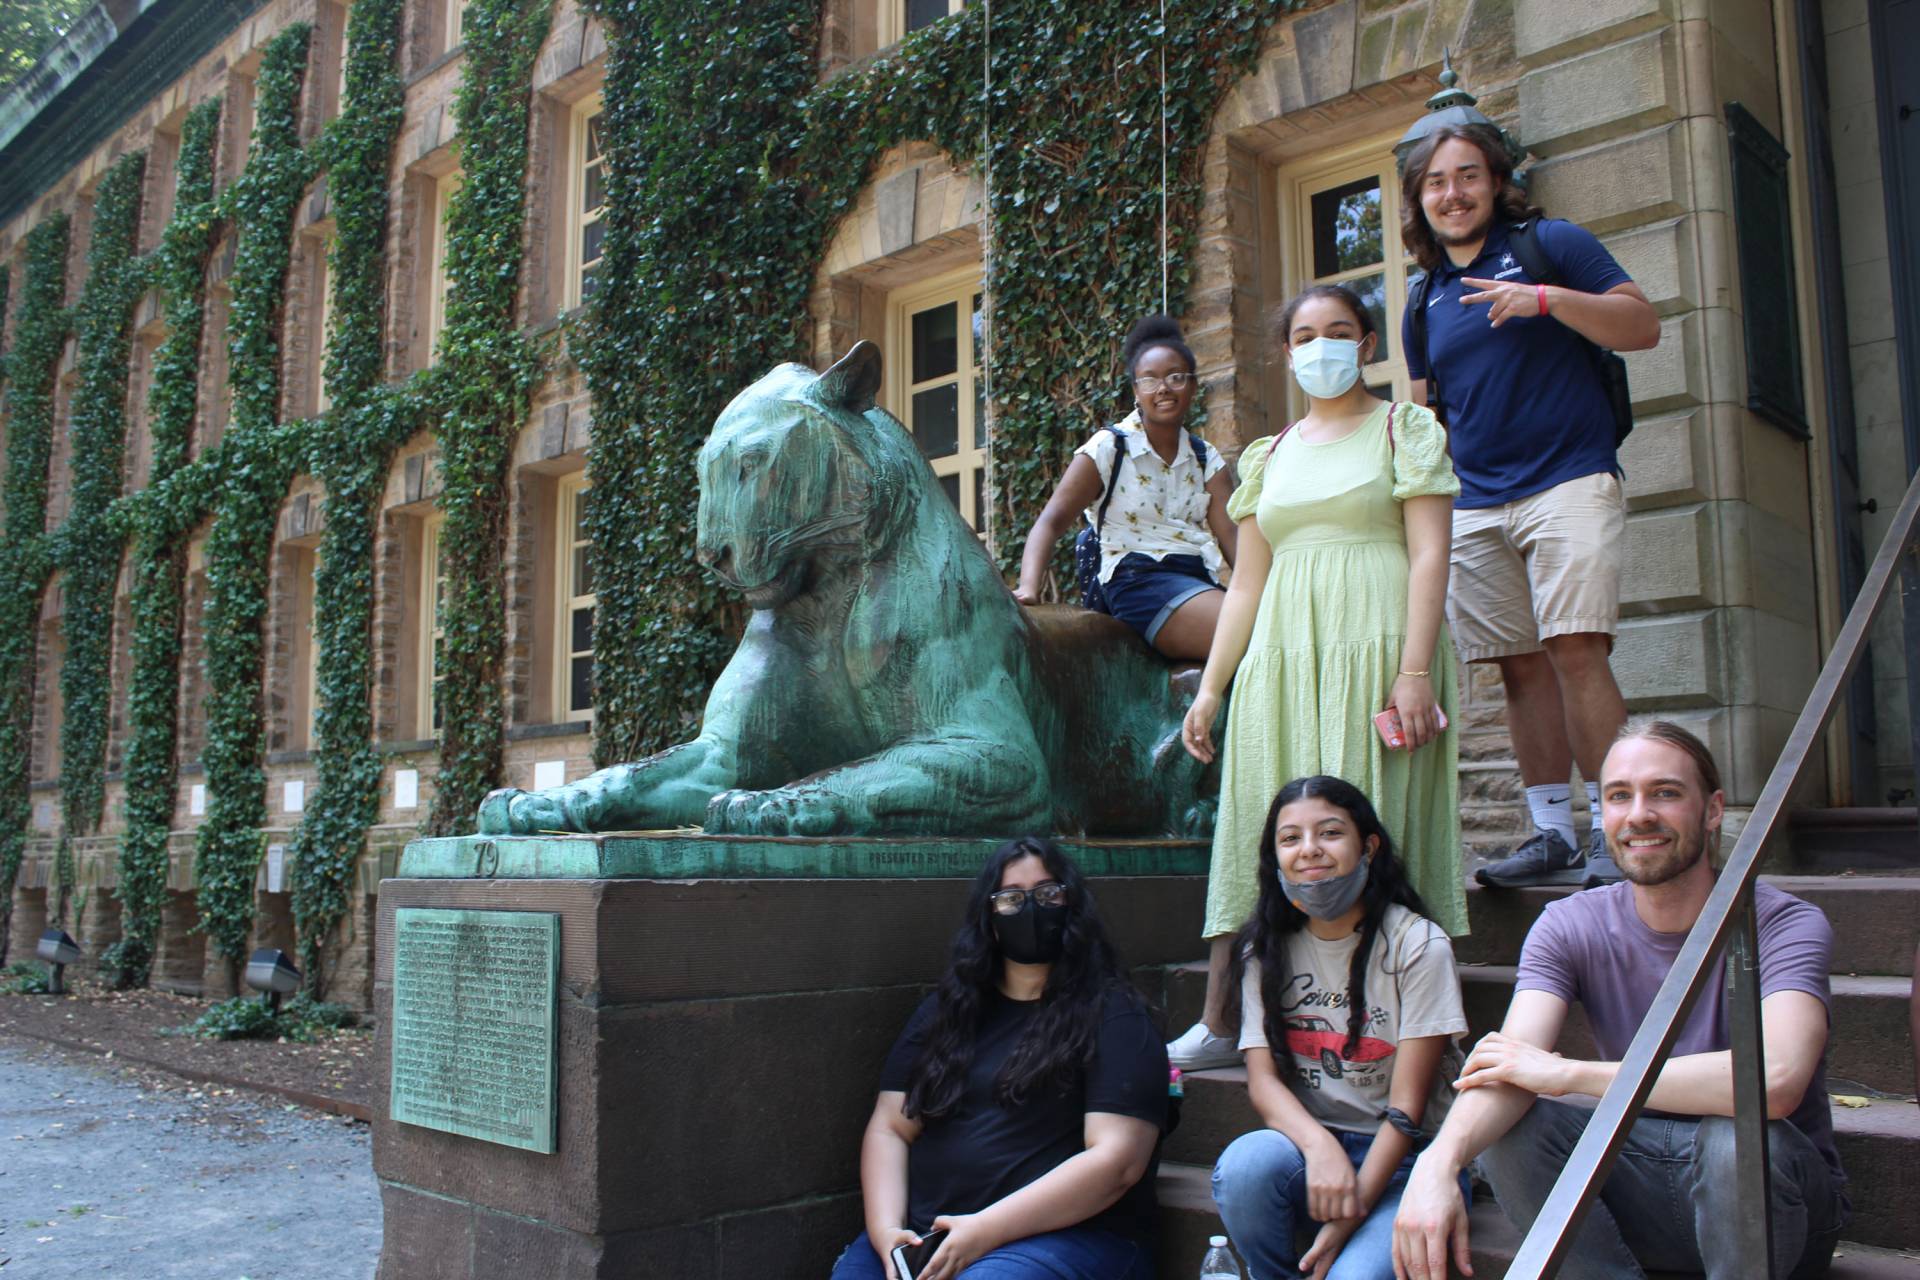 Students pose in front of tiger sculpture